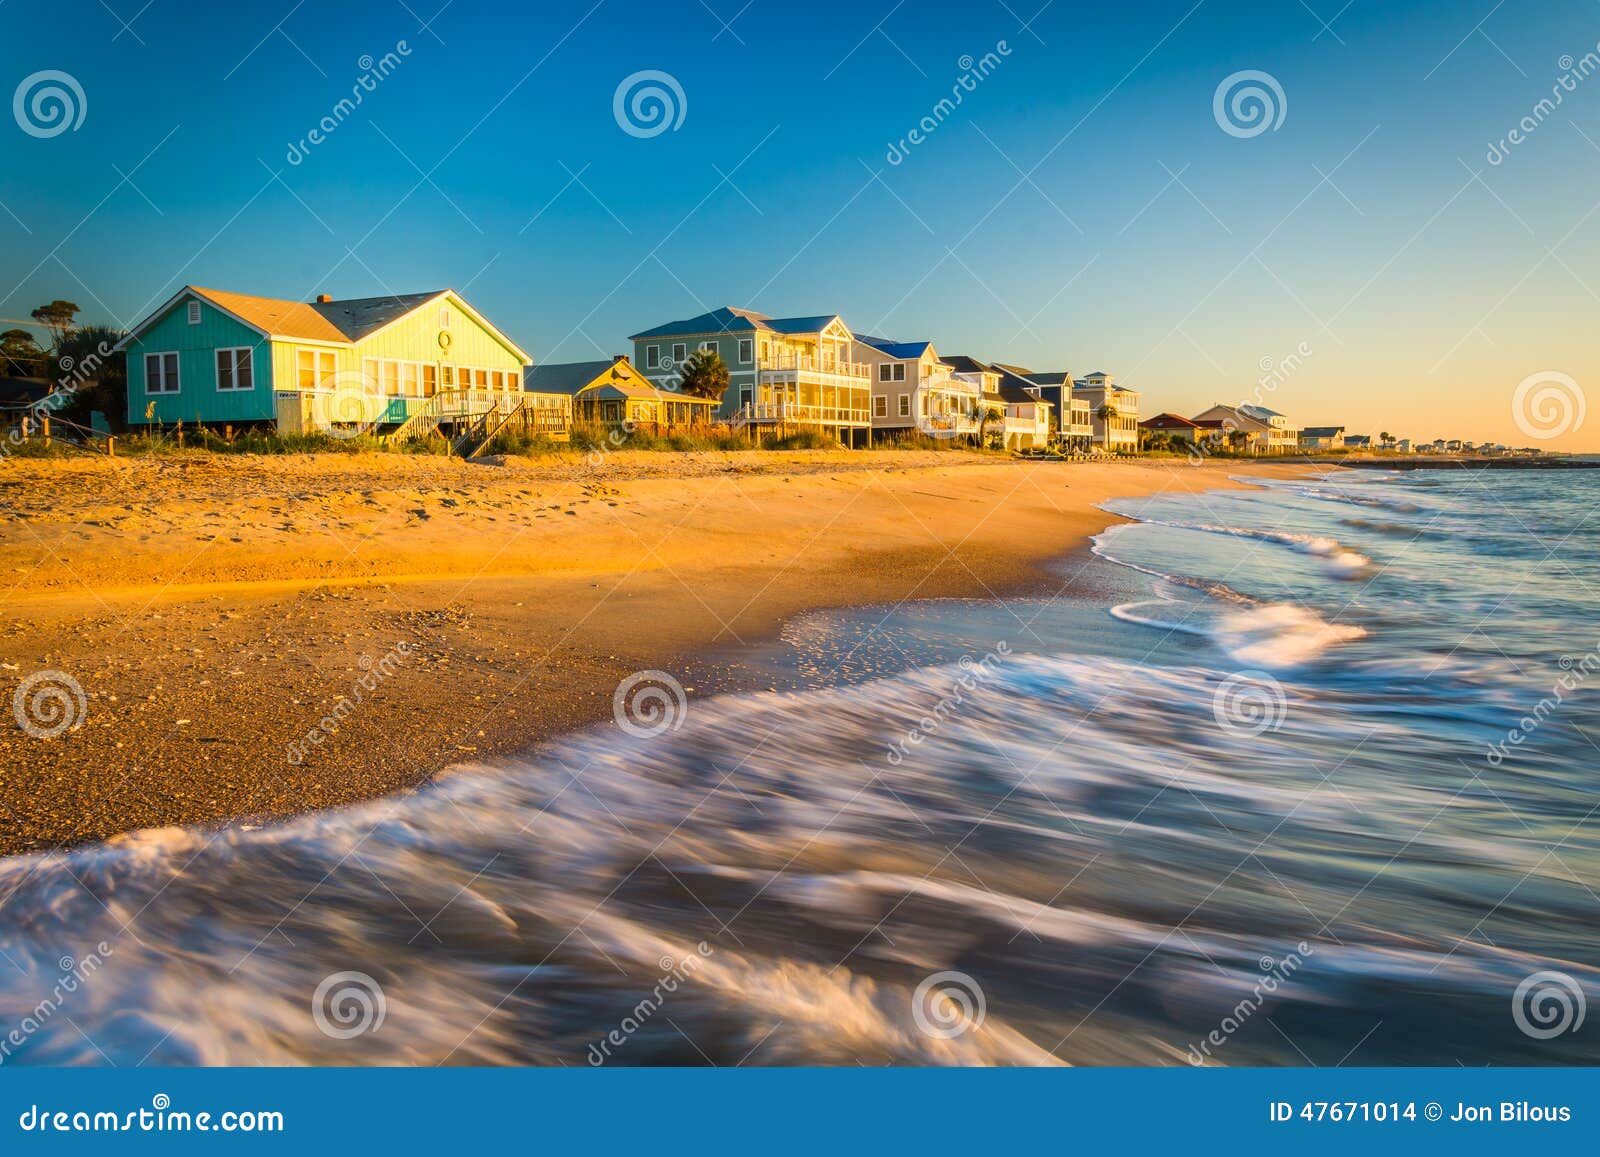 waves in the atlantic ocean and morning light on beachfront home